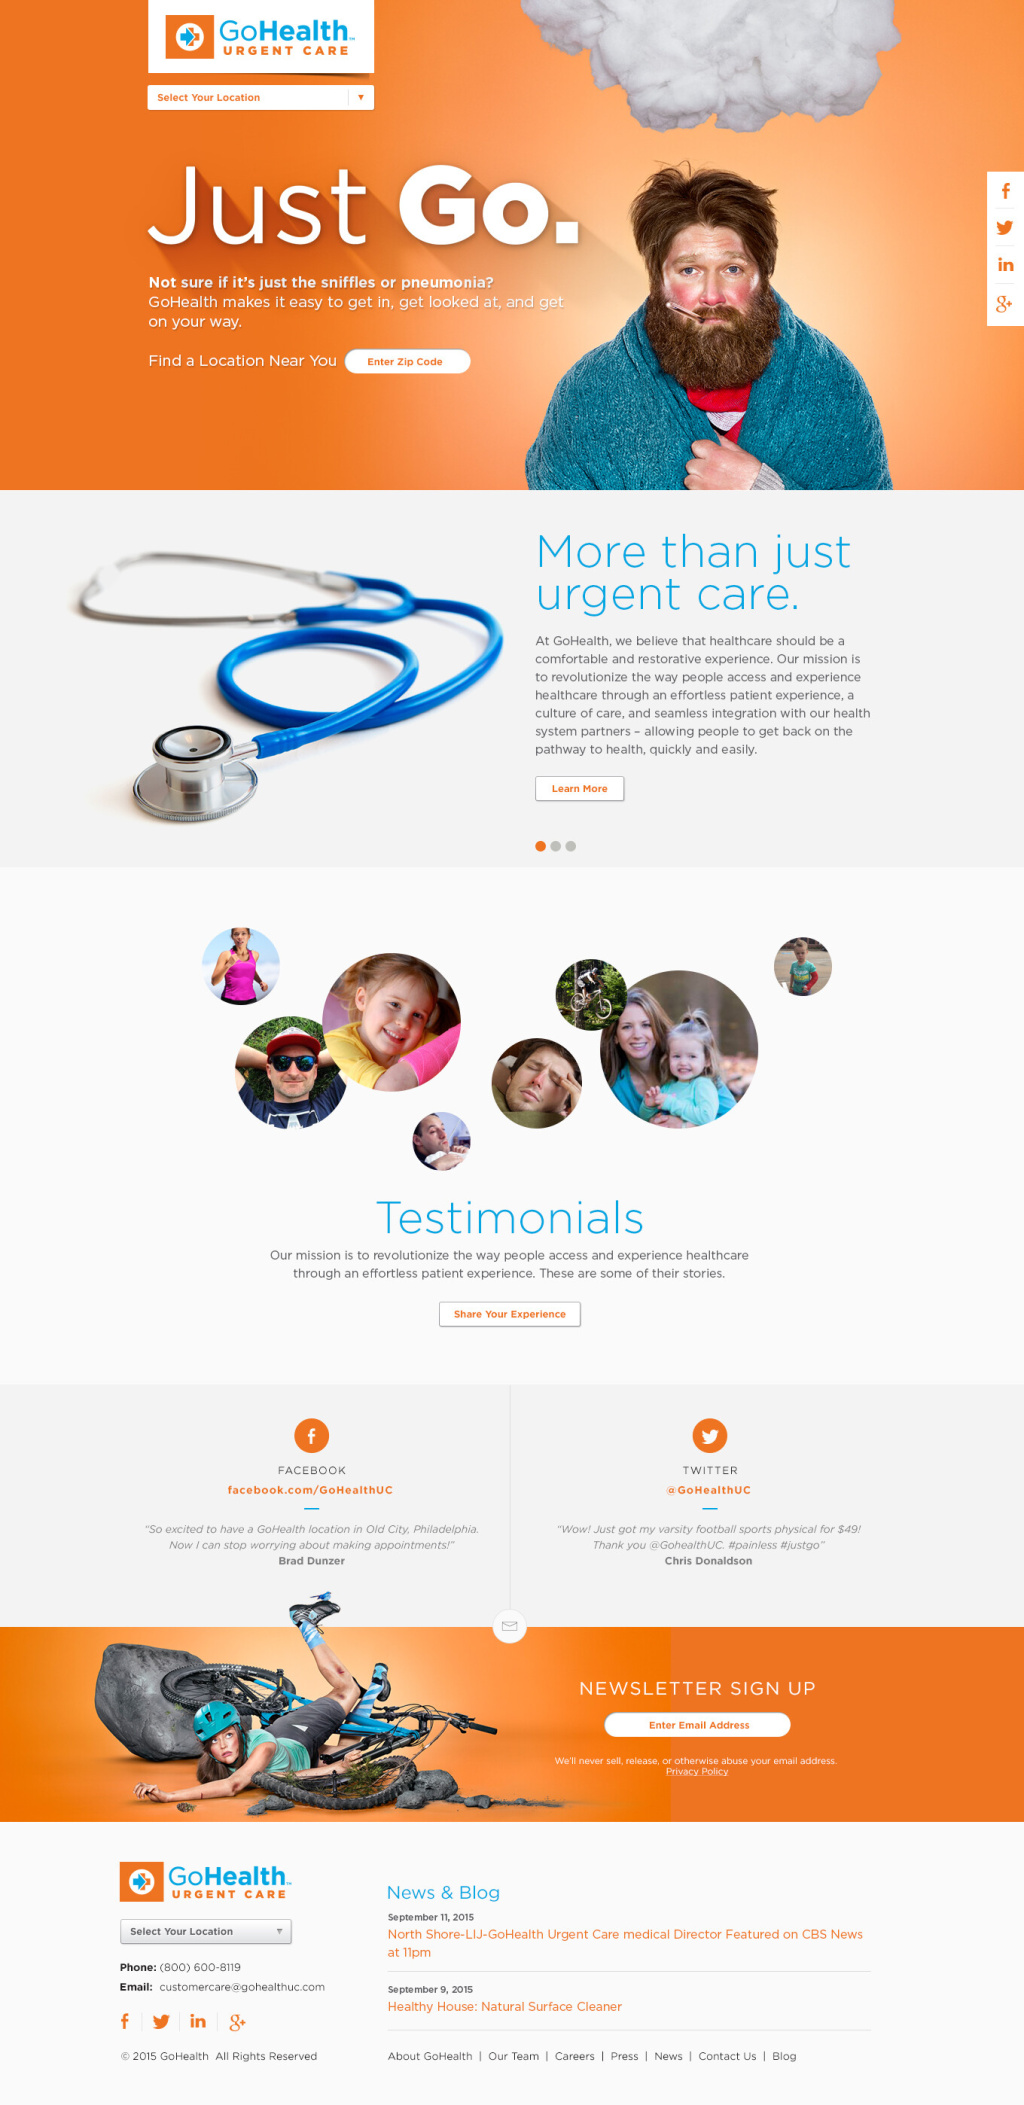 A website mock-up of the GoHealth "Just Go" campaign landing page.